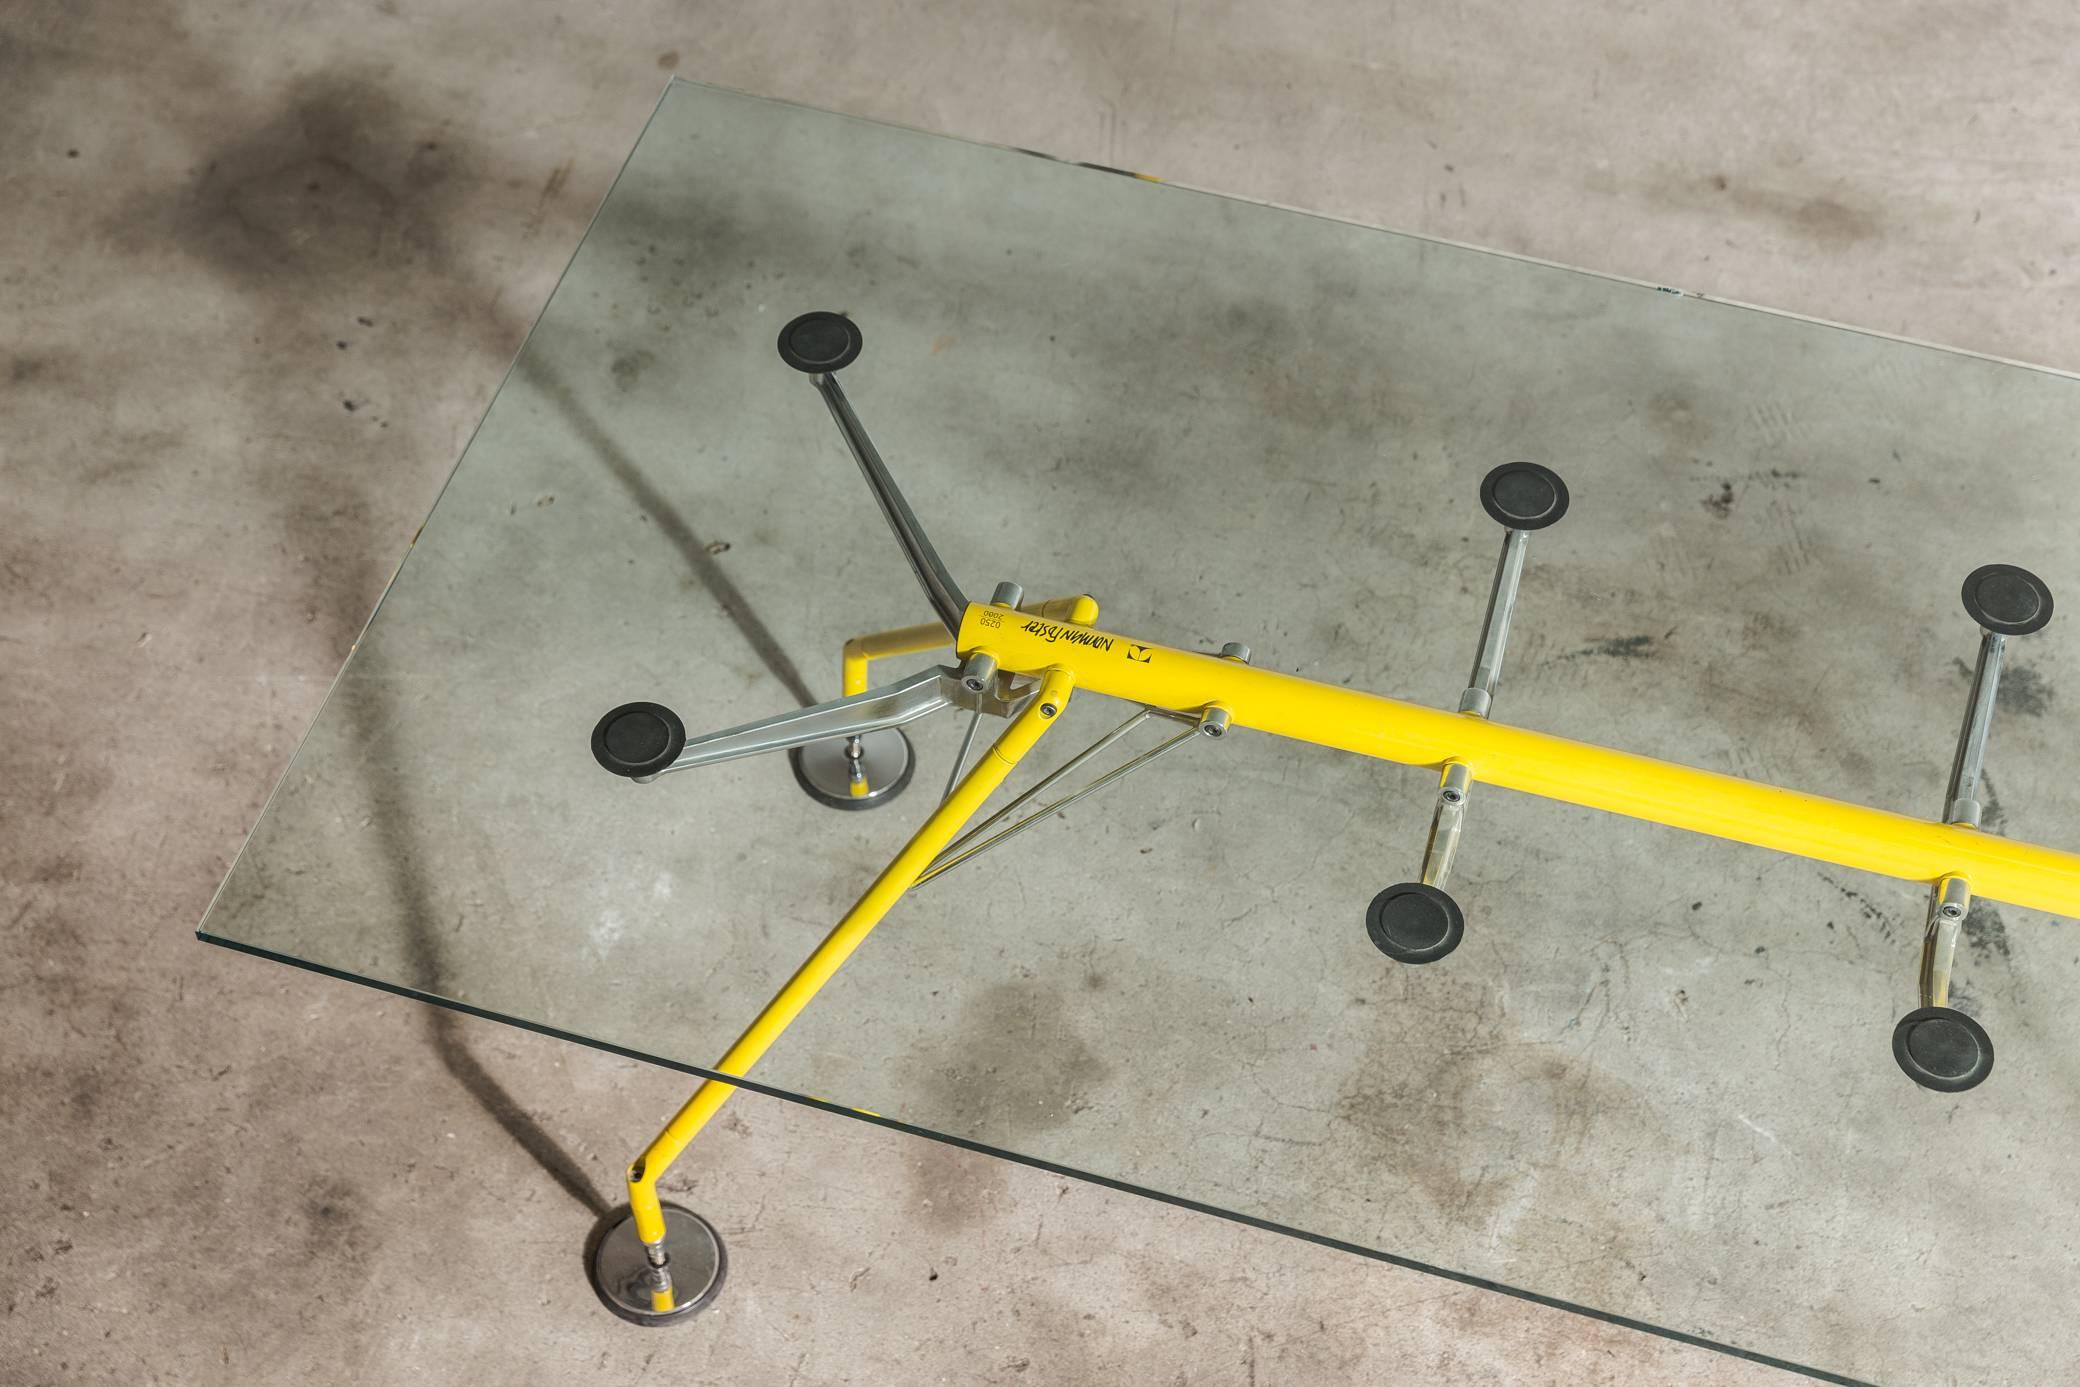 Dining table, conference table or desk named Nomos, designed by Sir Norman Foster, United Kingdom, 1986 and manufactured by Tecno, 1986. This version in Yellow was part of a limited Edition series and is super rare. This iconic design piece has won